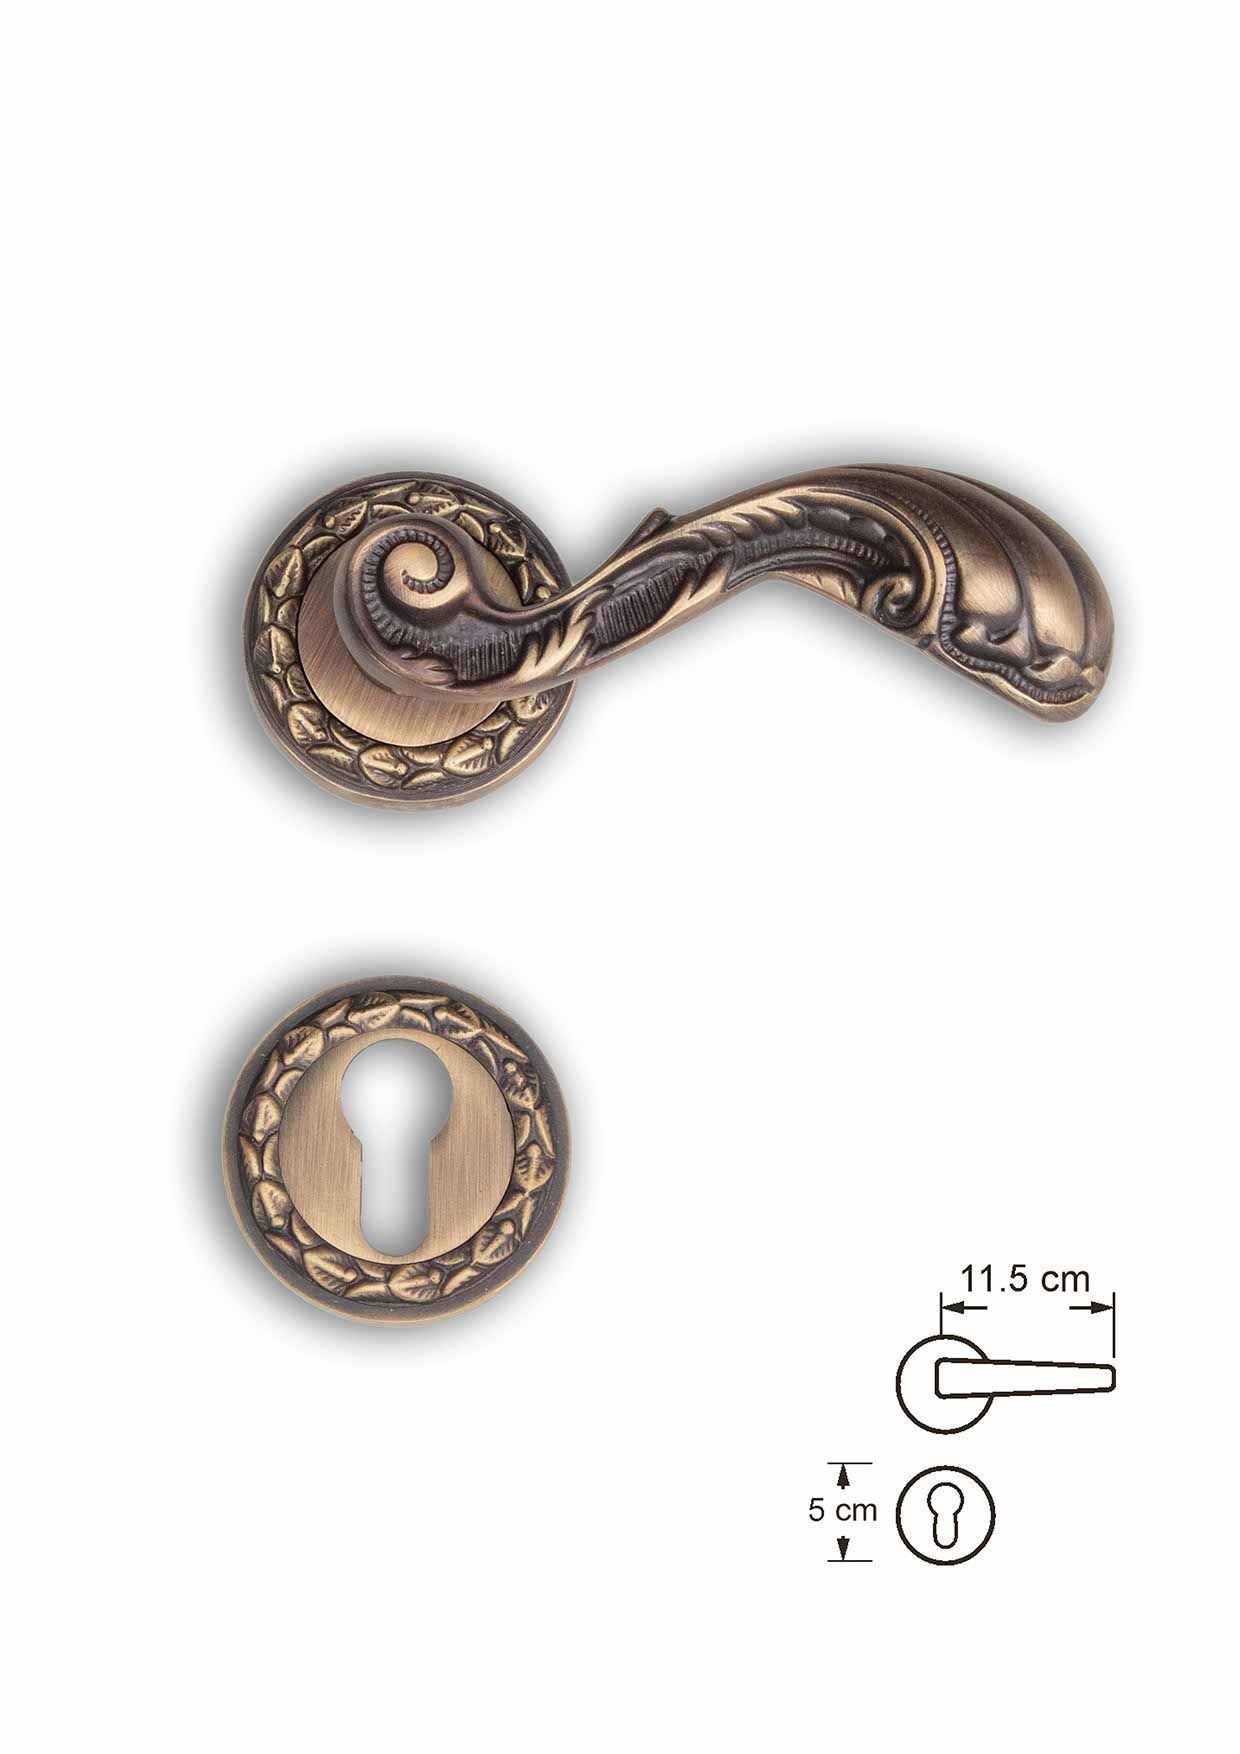 Refine your doors with our durable and charming rose handles for timeless elegance and smooth functionality.